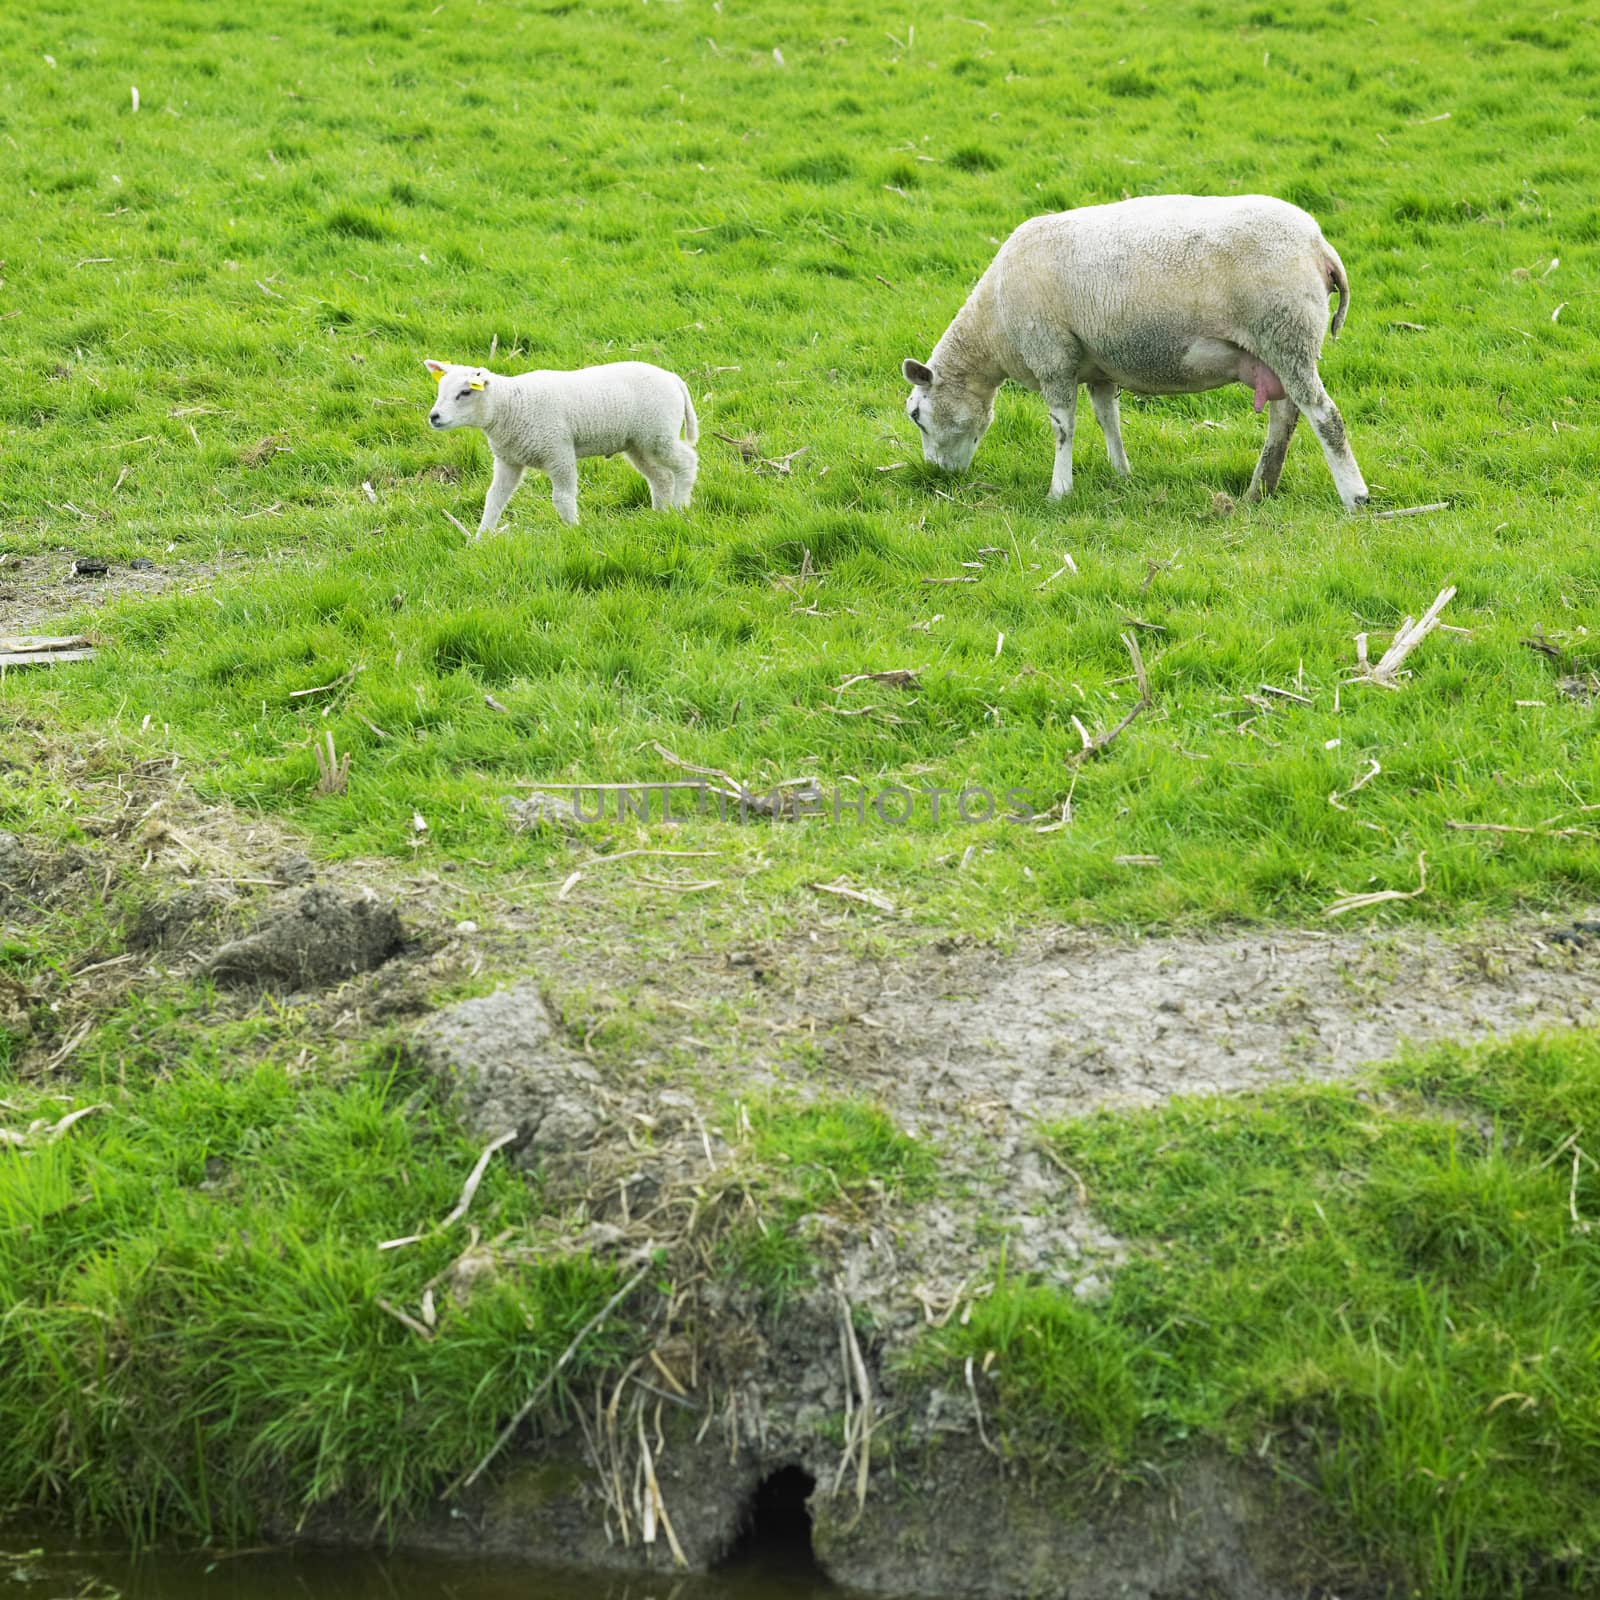 sheep with a lamb, Netherlands by phbcz